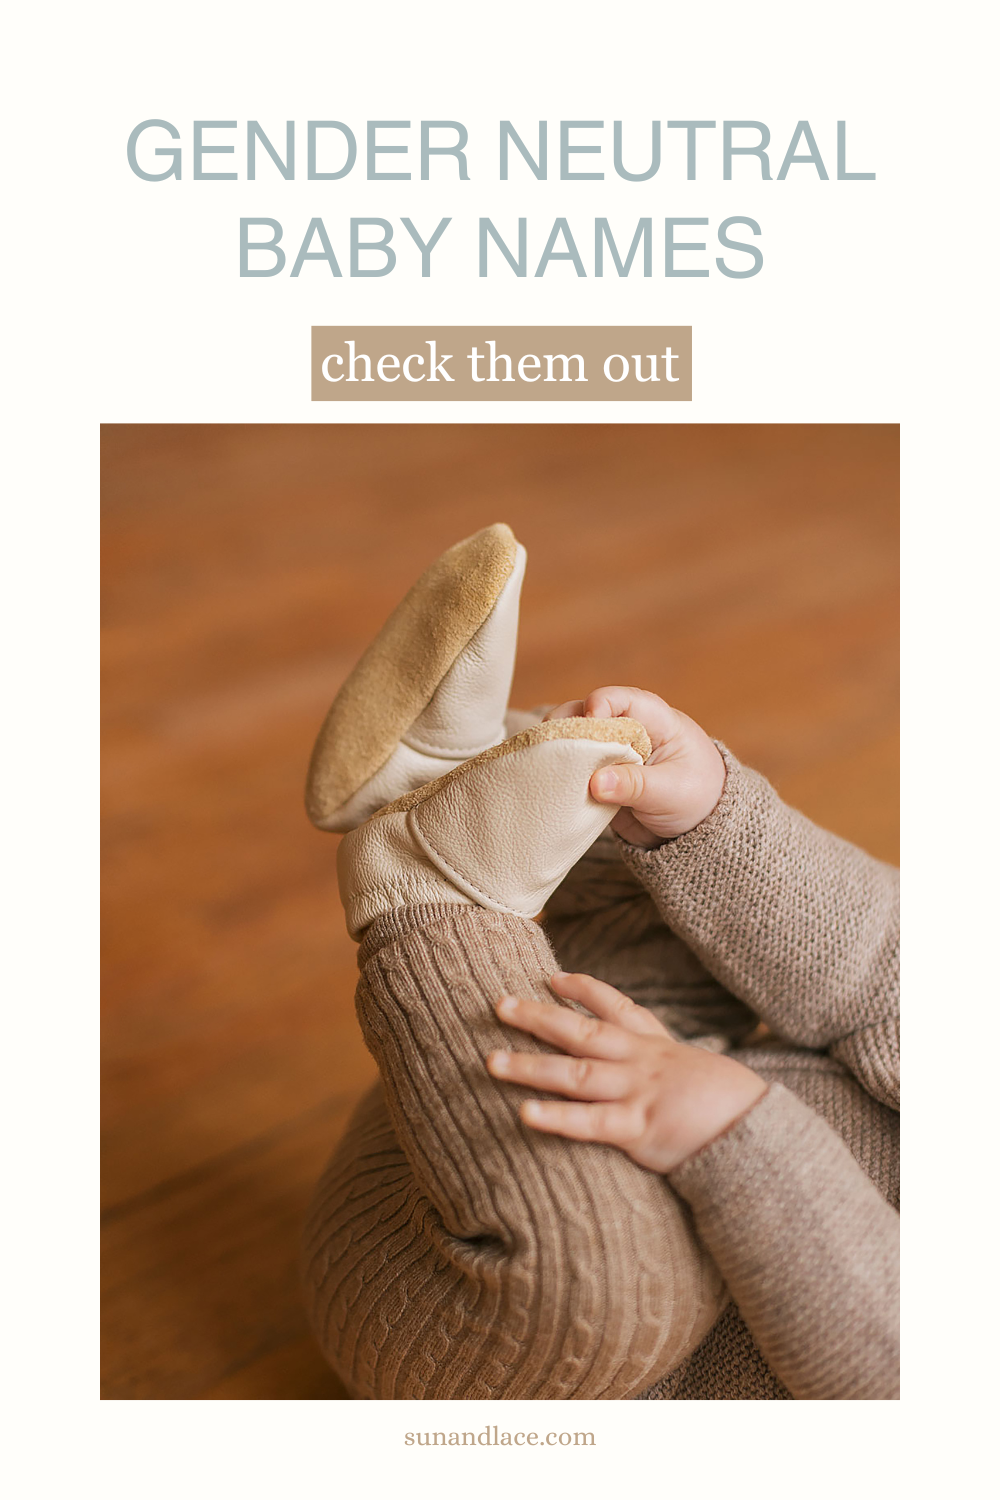 Gender neutral baby name ideas, cream baby shoes on feet